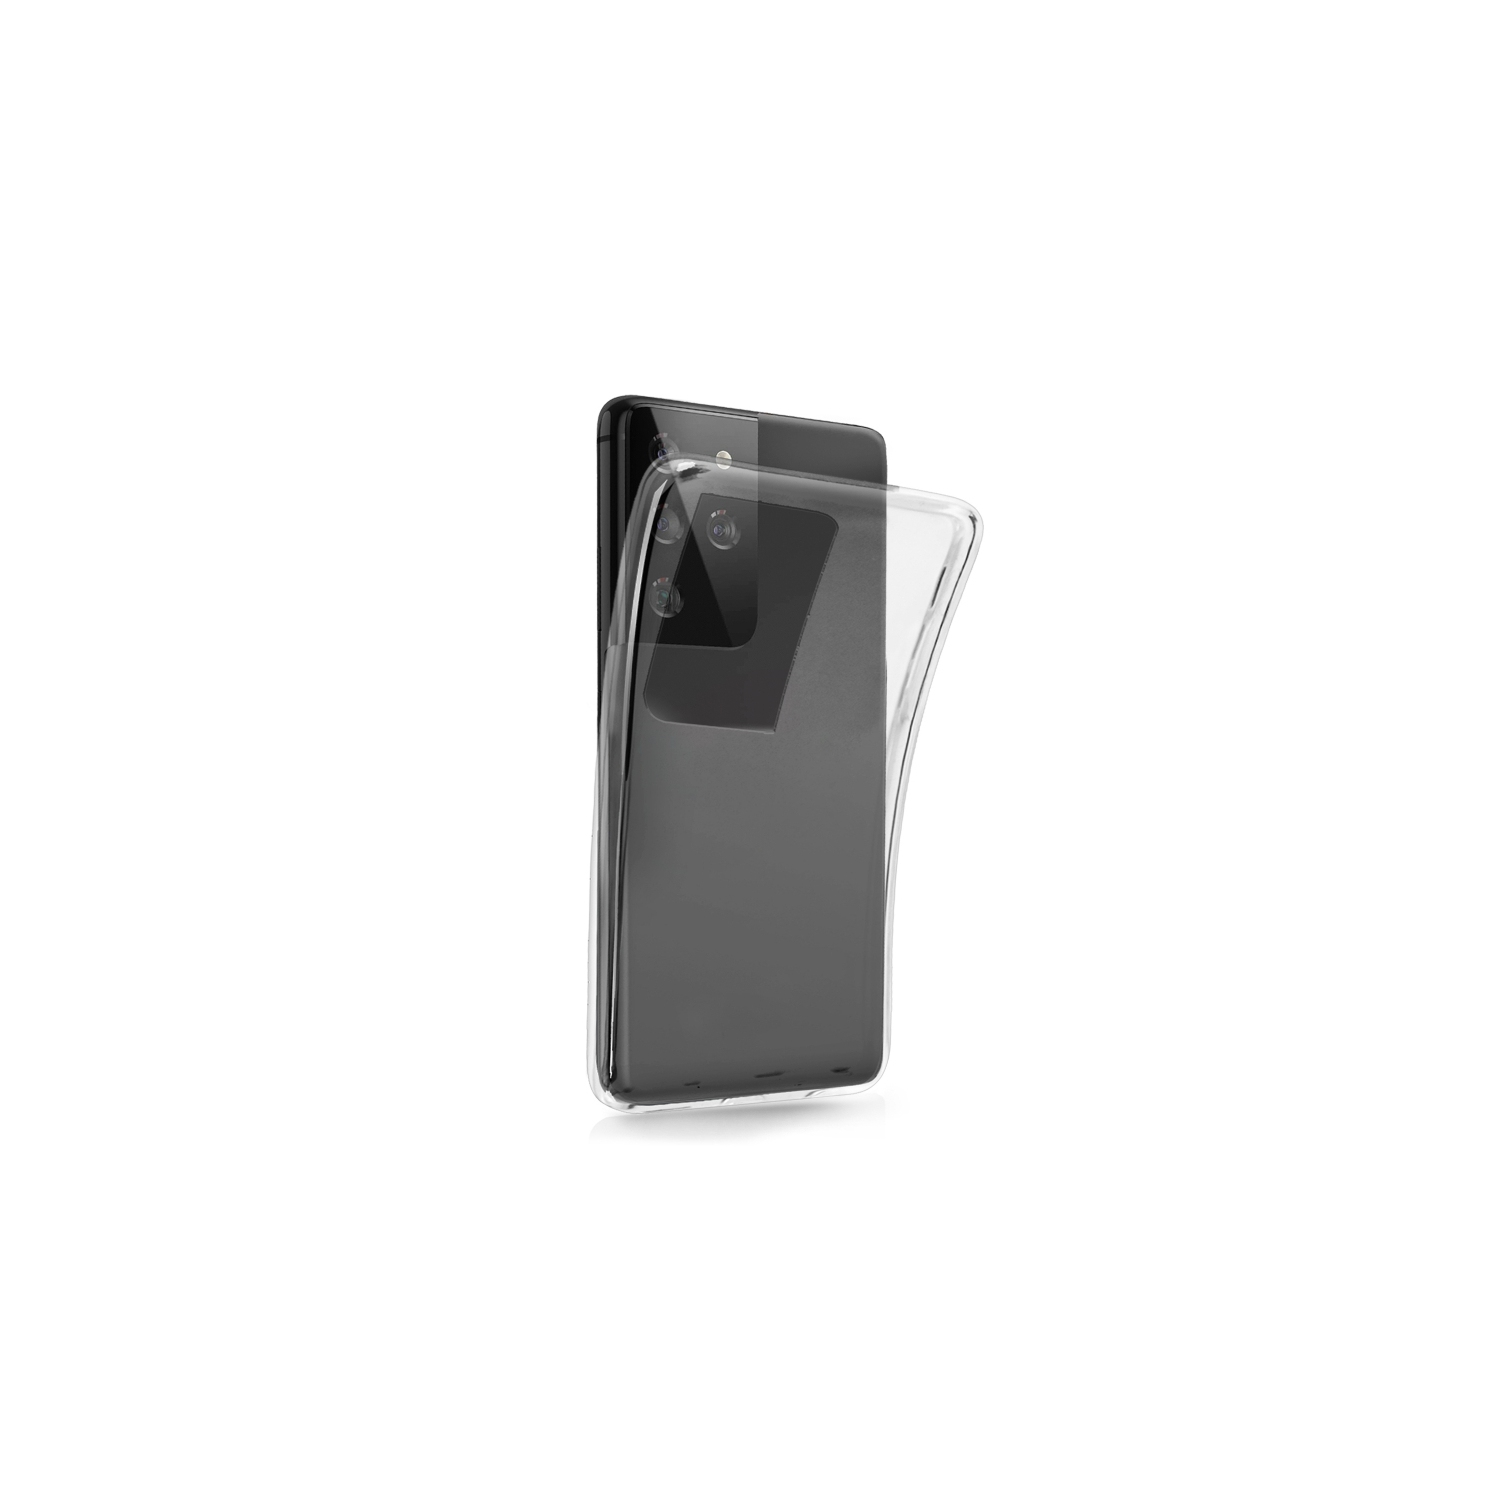 【CSmart】 Ultra Thin Soft TPU Silicone Jelly Bumper Back Cover Case for Samsung Galaxy S21 Ultra, 5G, 6.8", Clear